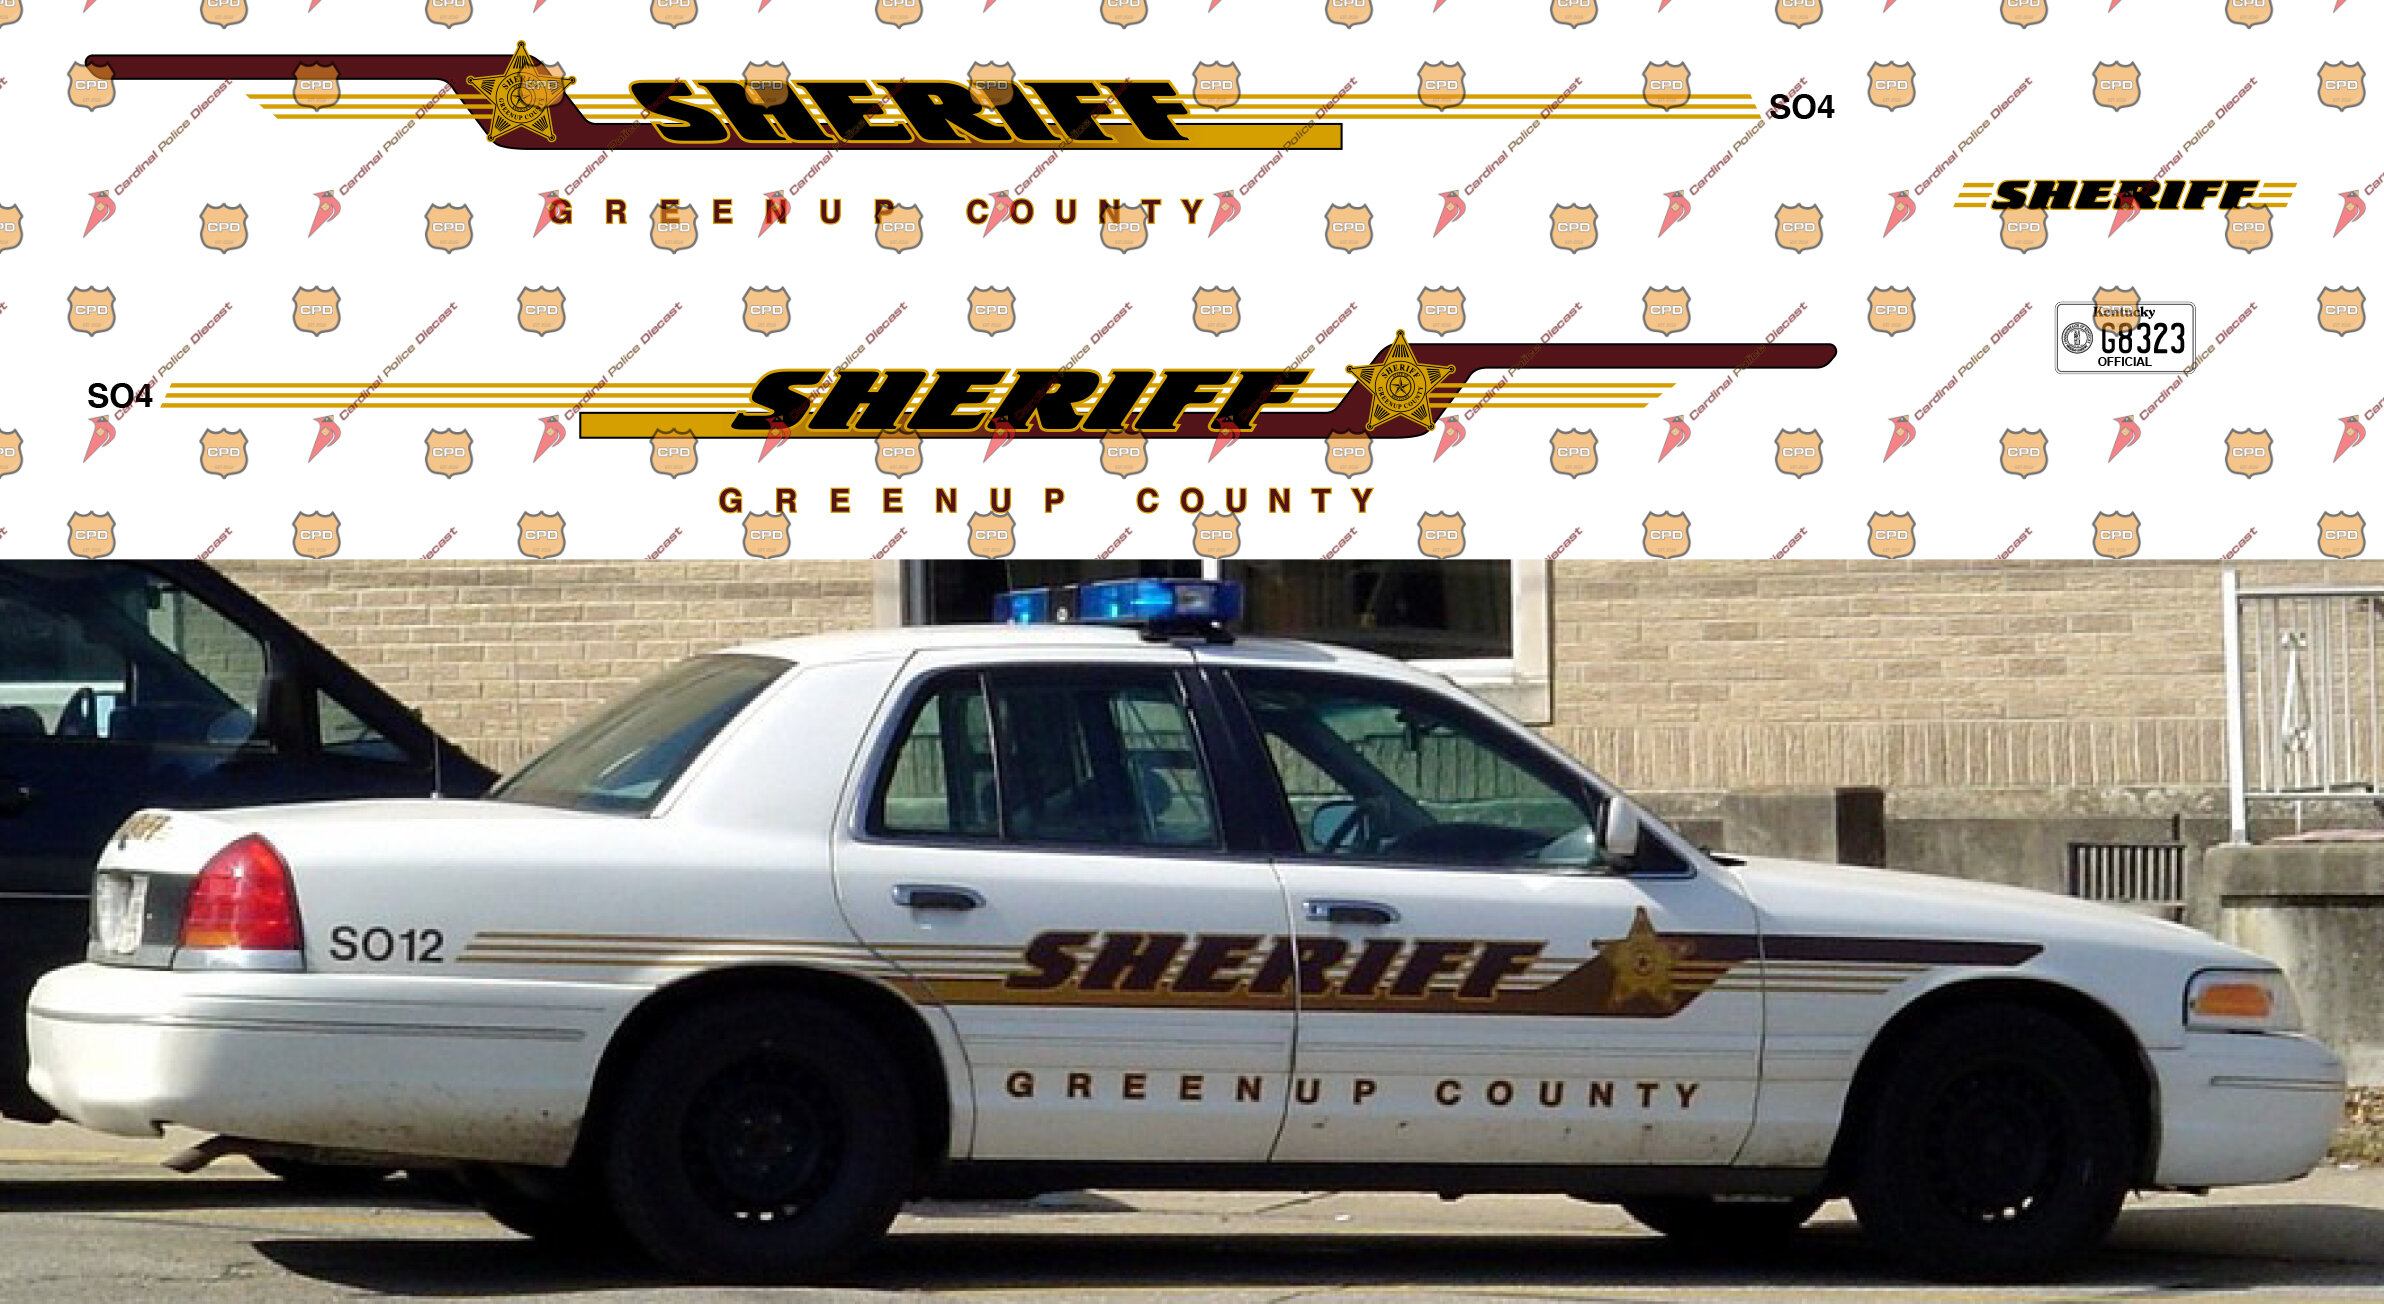 Image of Greenup County Sheriff's Office